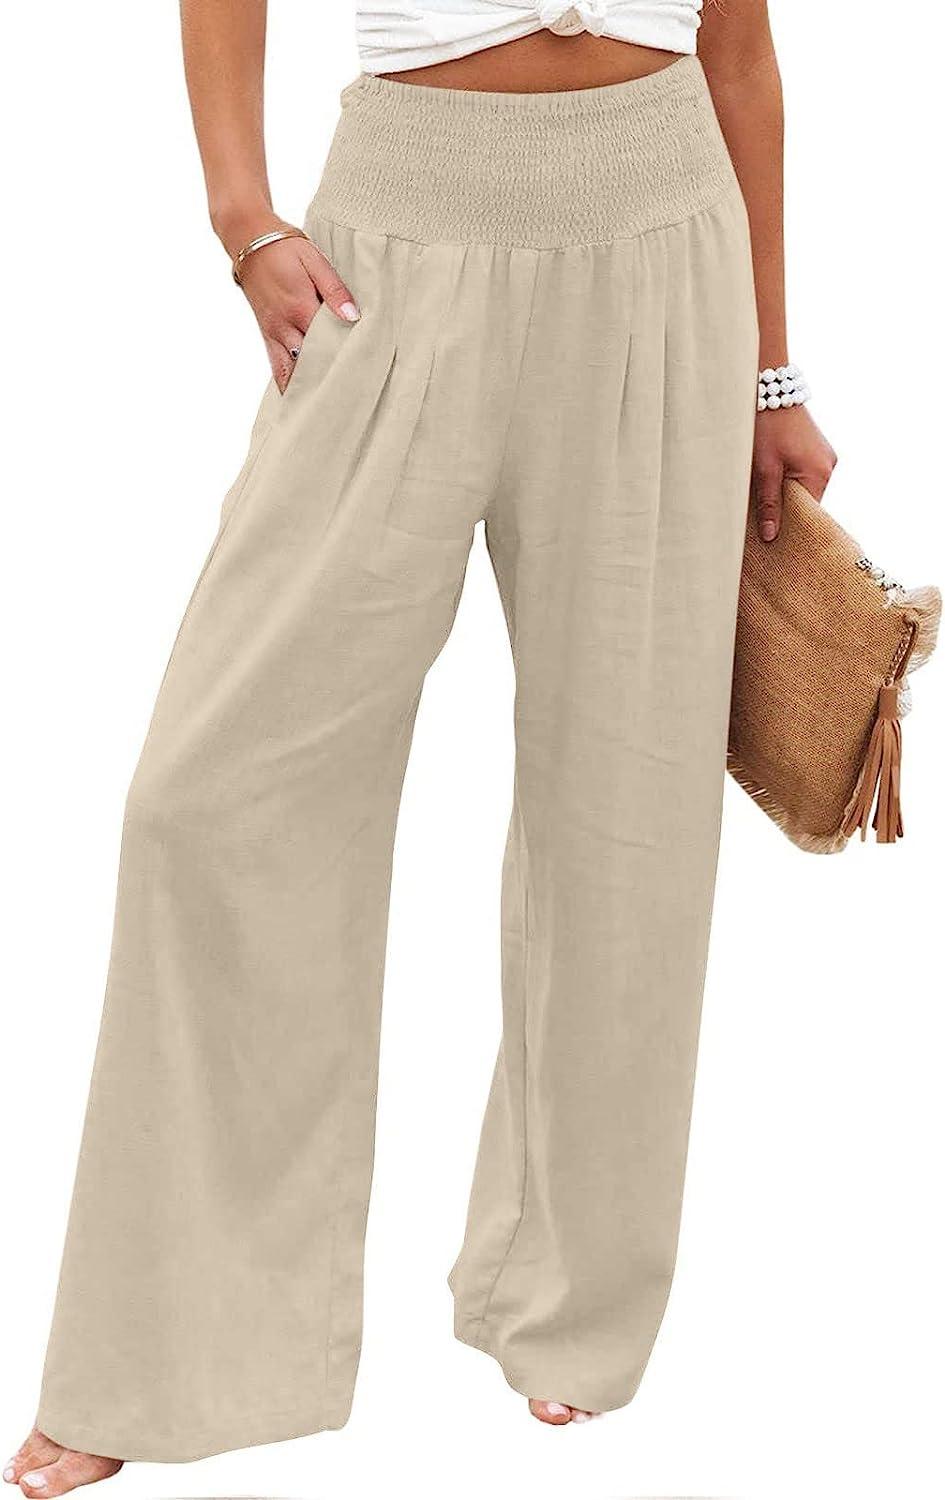 Wide Leg Pants for Women Work Business Casual High Waisted Dress Pants  Solid Baggy Flowy Office Trousers with Pockets 